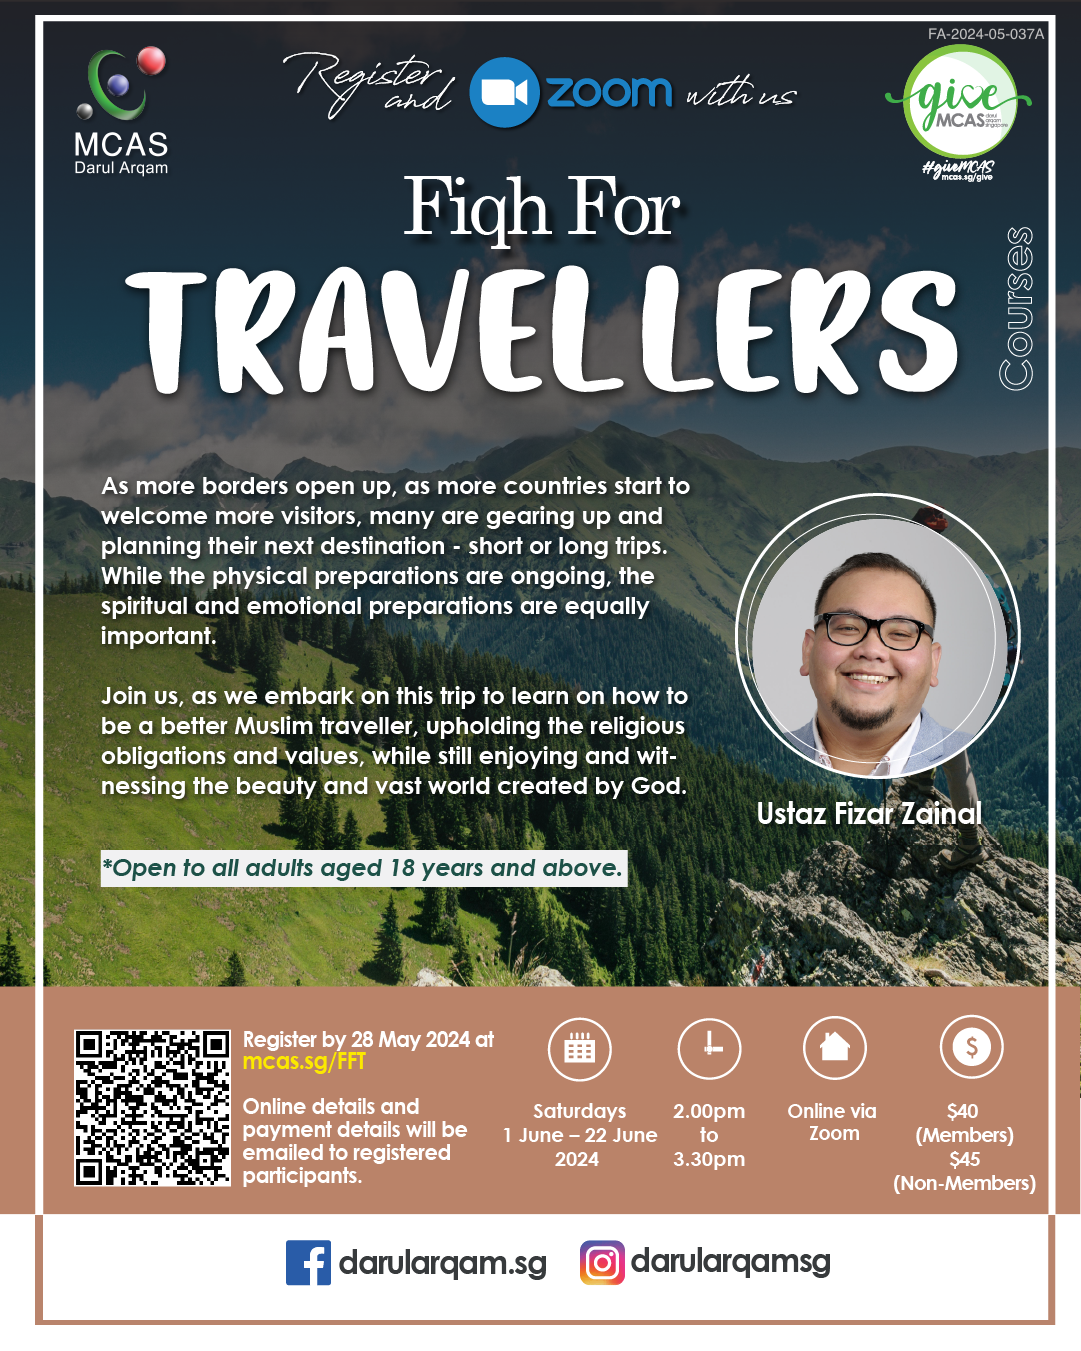 Fiqh For Travellers